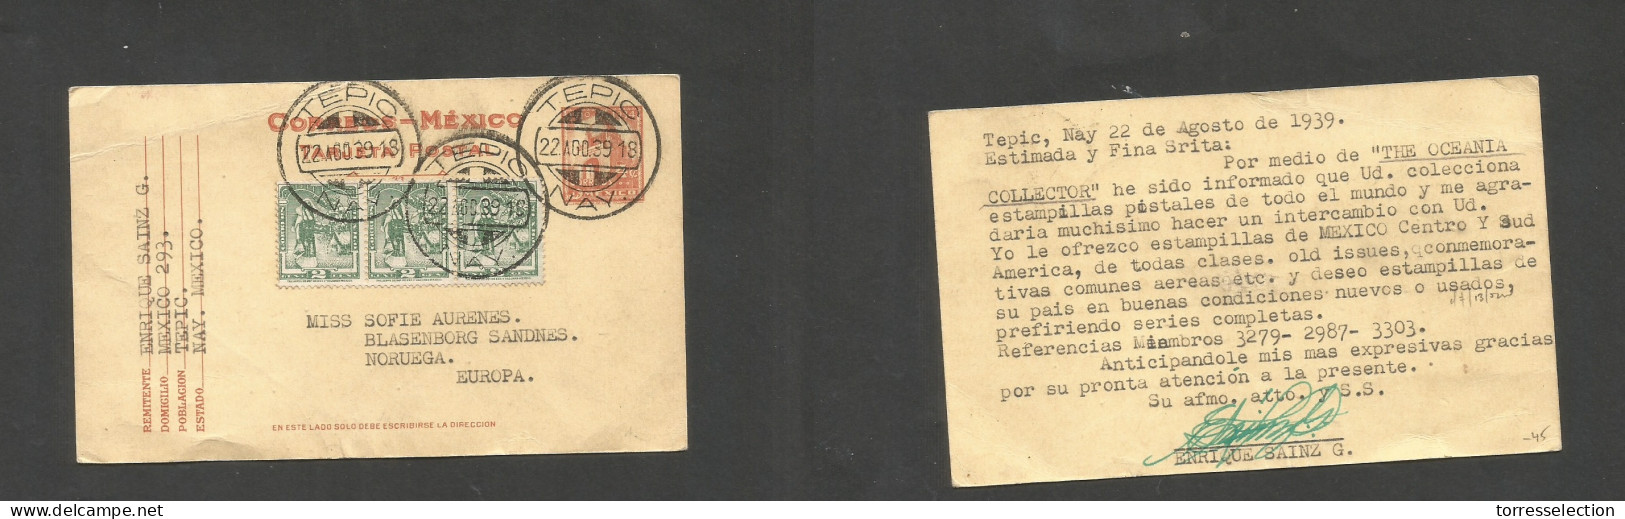 MEXICO - Stationery. 1939 (22 Aug) Tepic, Nay - Norway, Blasenborg. 4c Red Stat Card + 3 Adtls, At 10c Rate, Tied Cds. X - Mexique